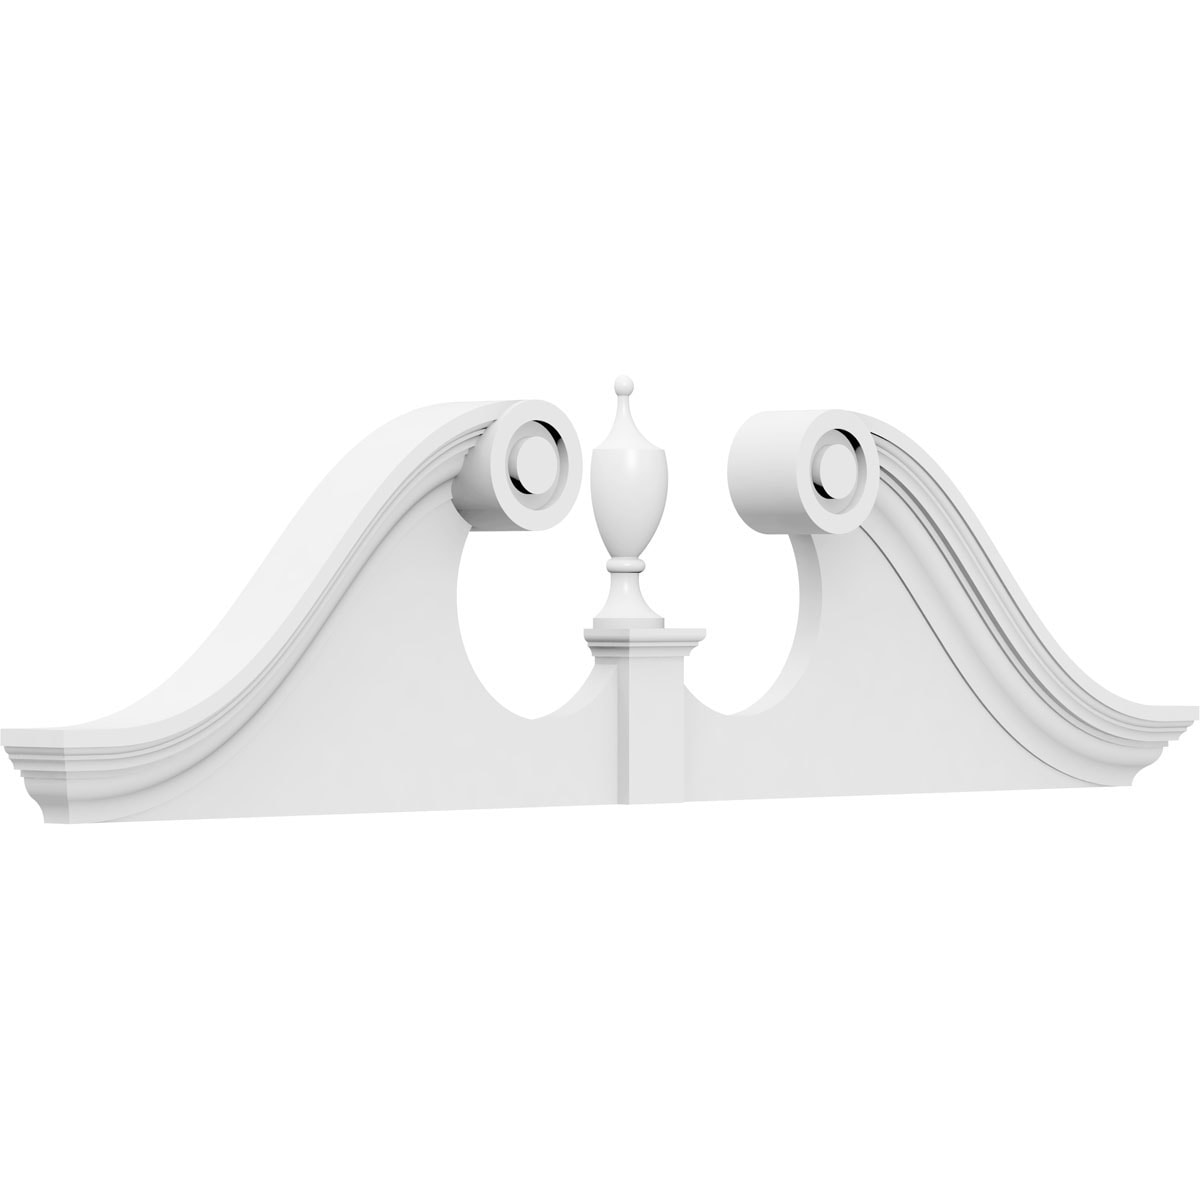 Ekena Millwork Rams Head 56-in x 14-ft PVC Pediment Entry Door Casing Accent in White | PEDPS056X140RHP00